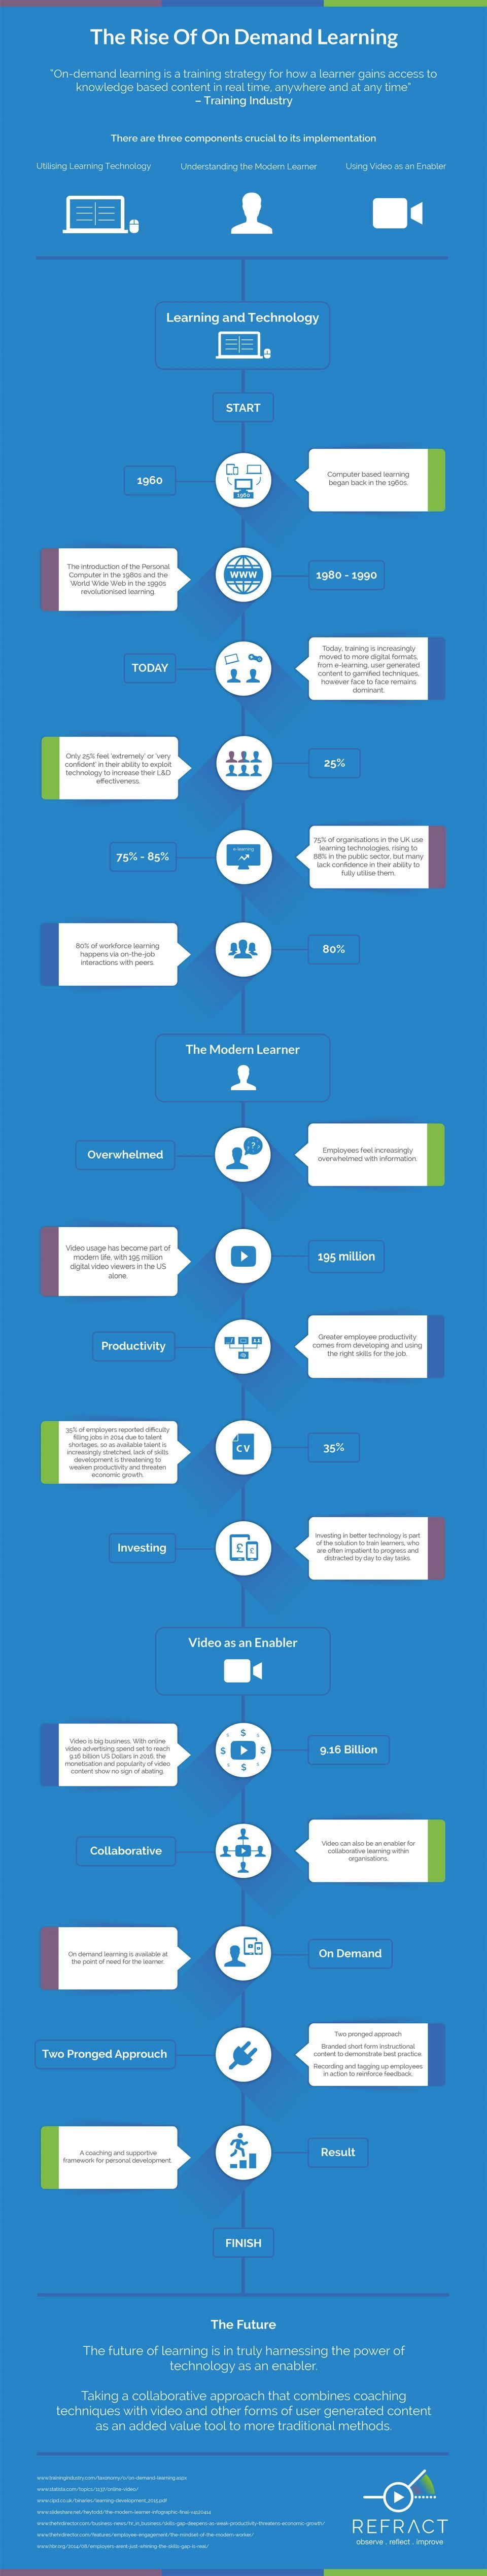 The Rise Of On Demand Learning Infographic